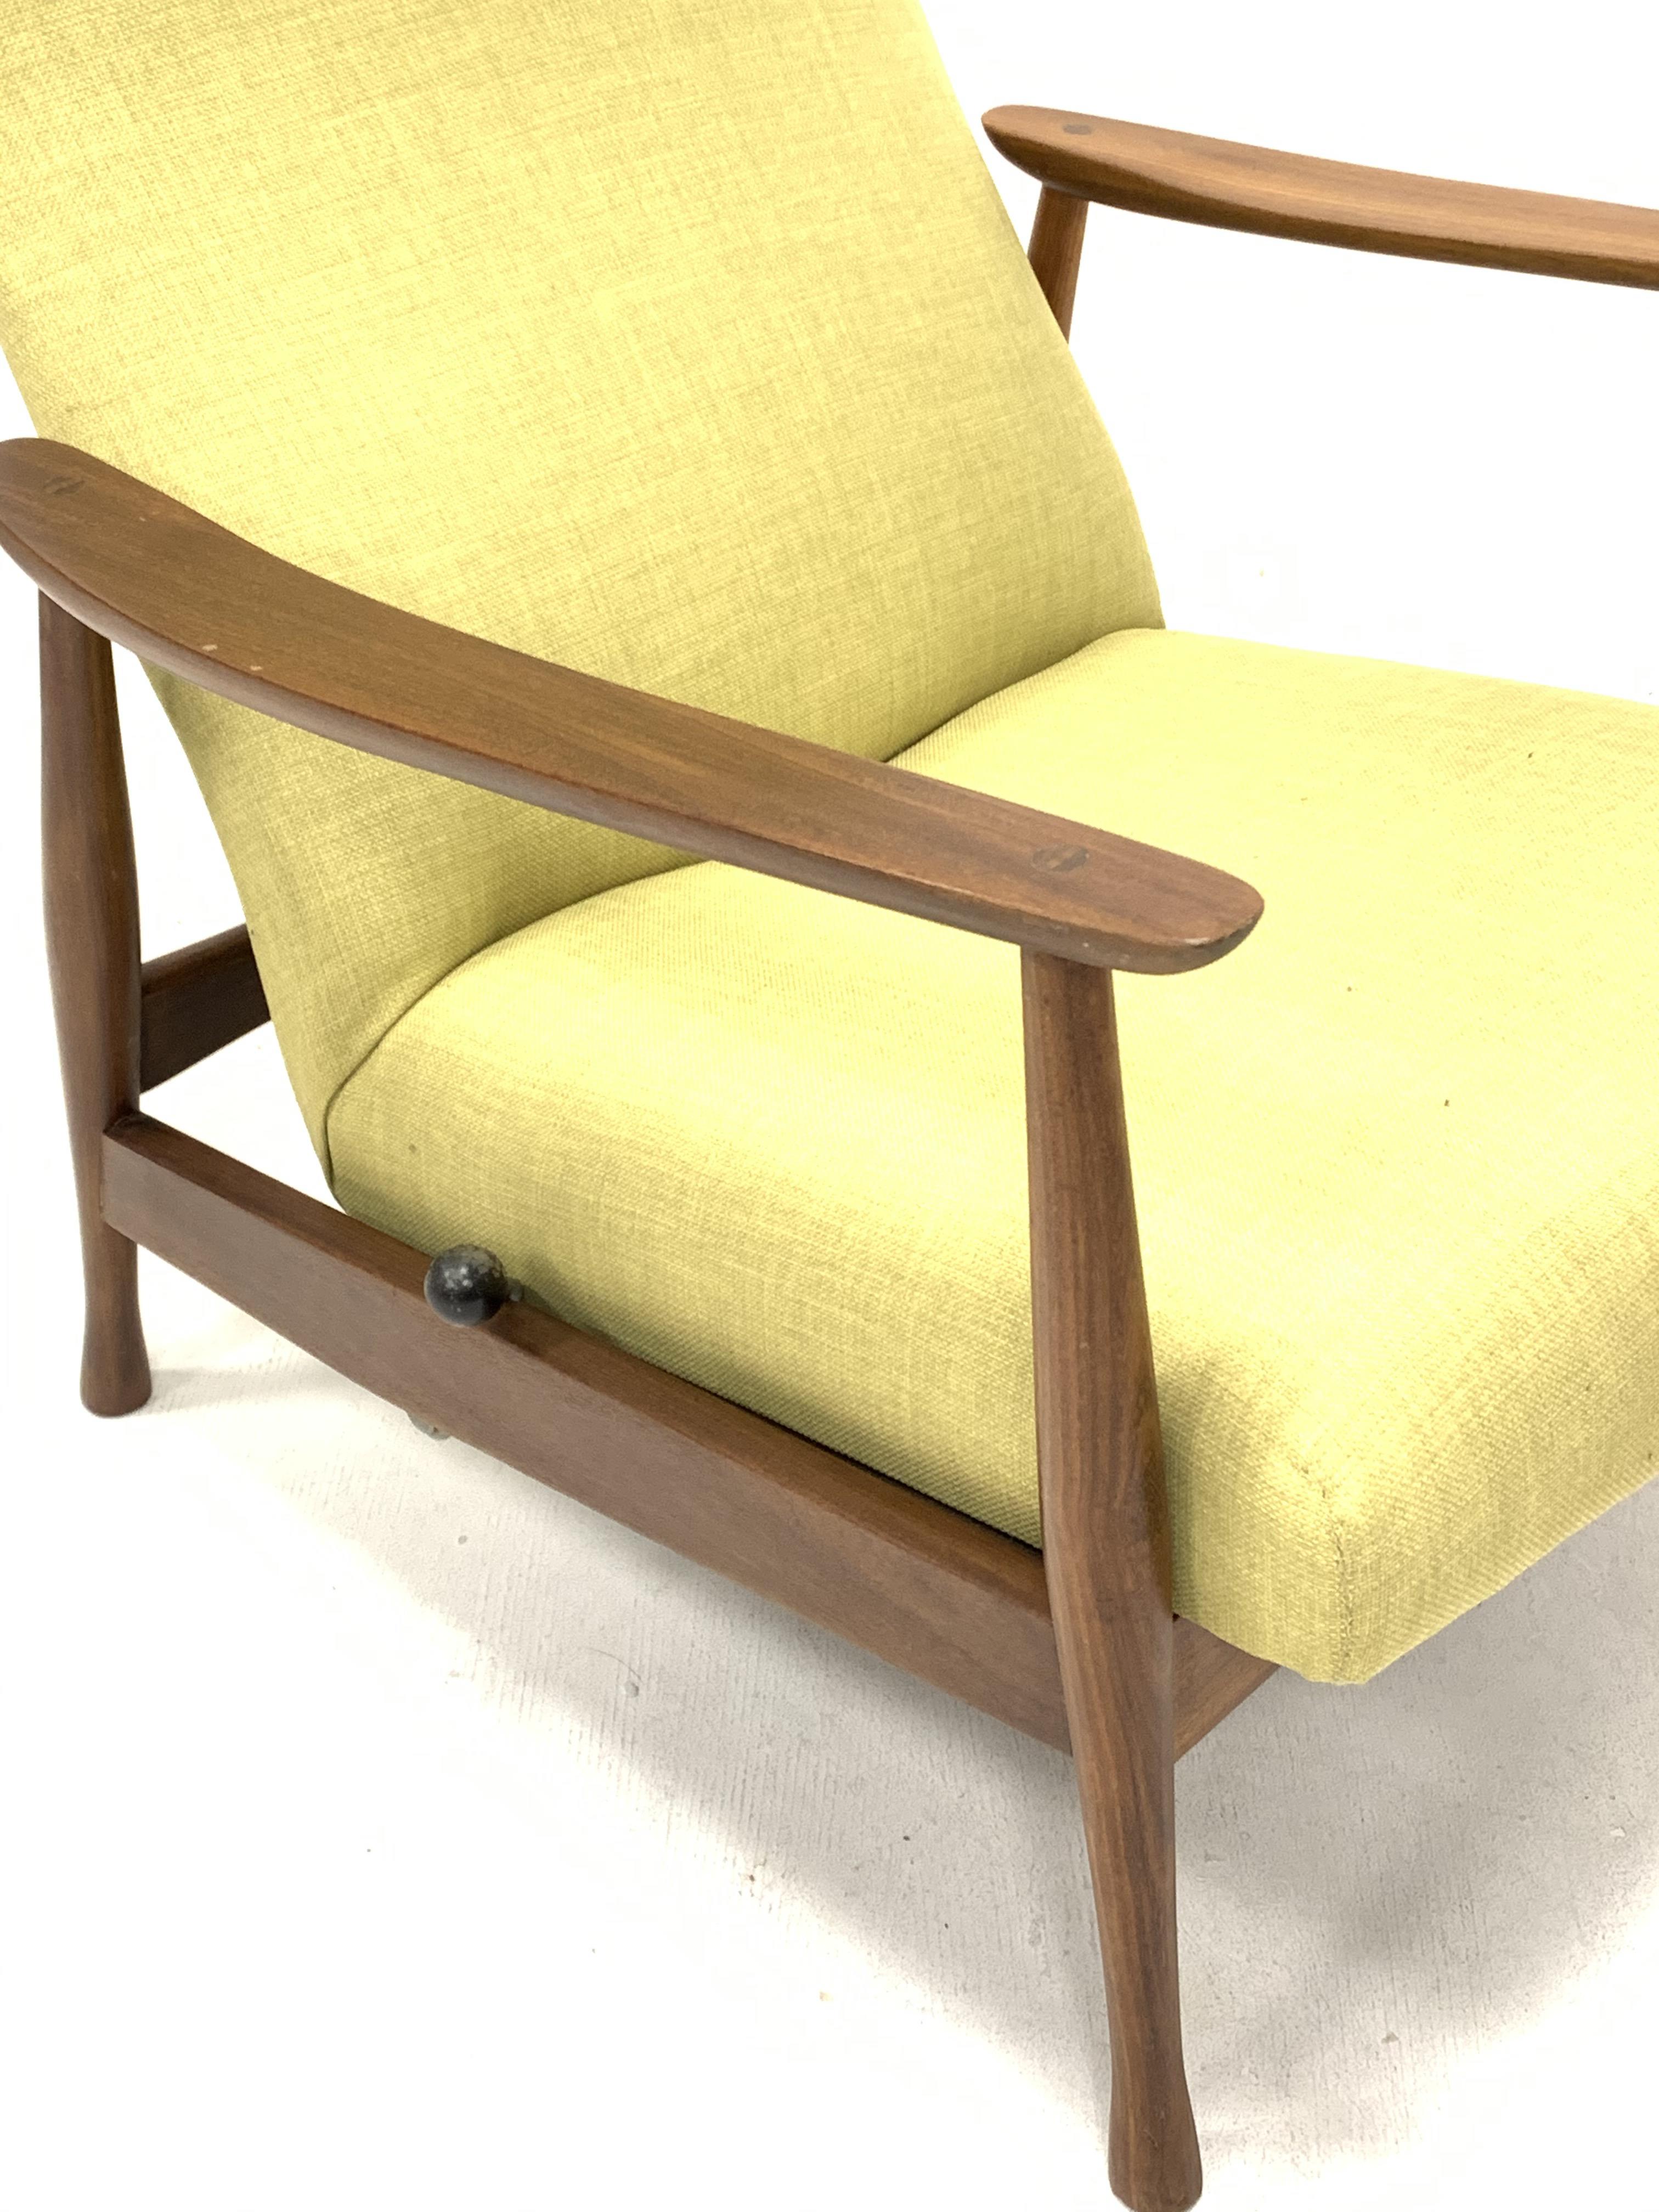 Milo Baughman - Danish teak framed rocking and reclining lounger armchair with rest lever, - Image 4 of 5